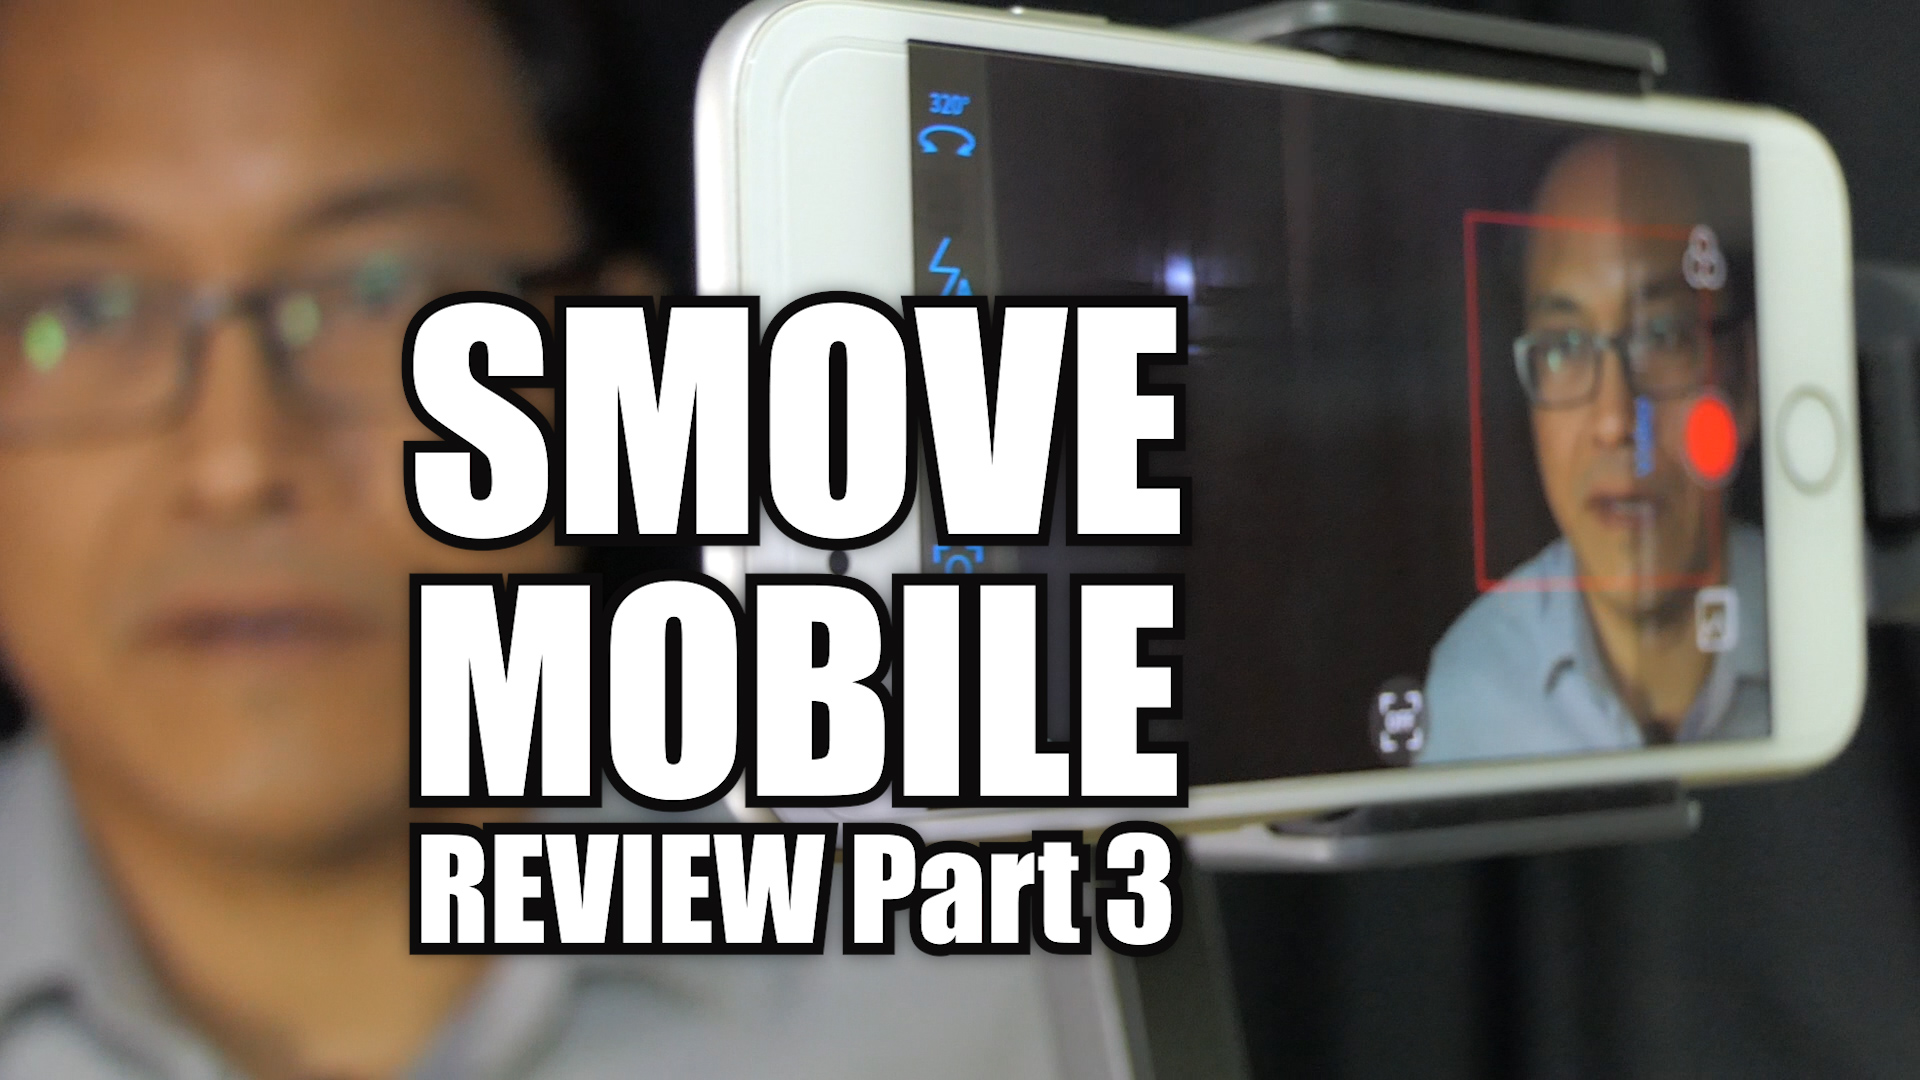 Smove Mobile Review Part 3 - Face Detection and Object Tracking